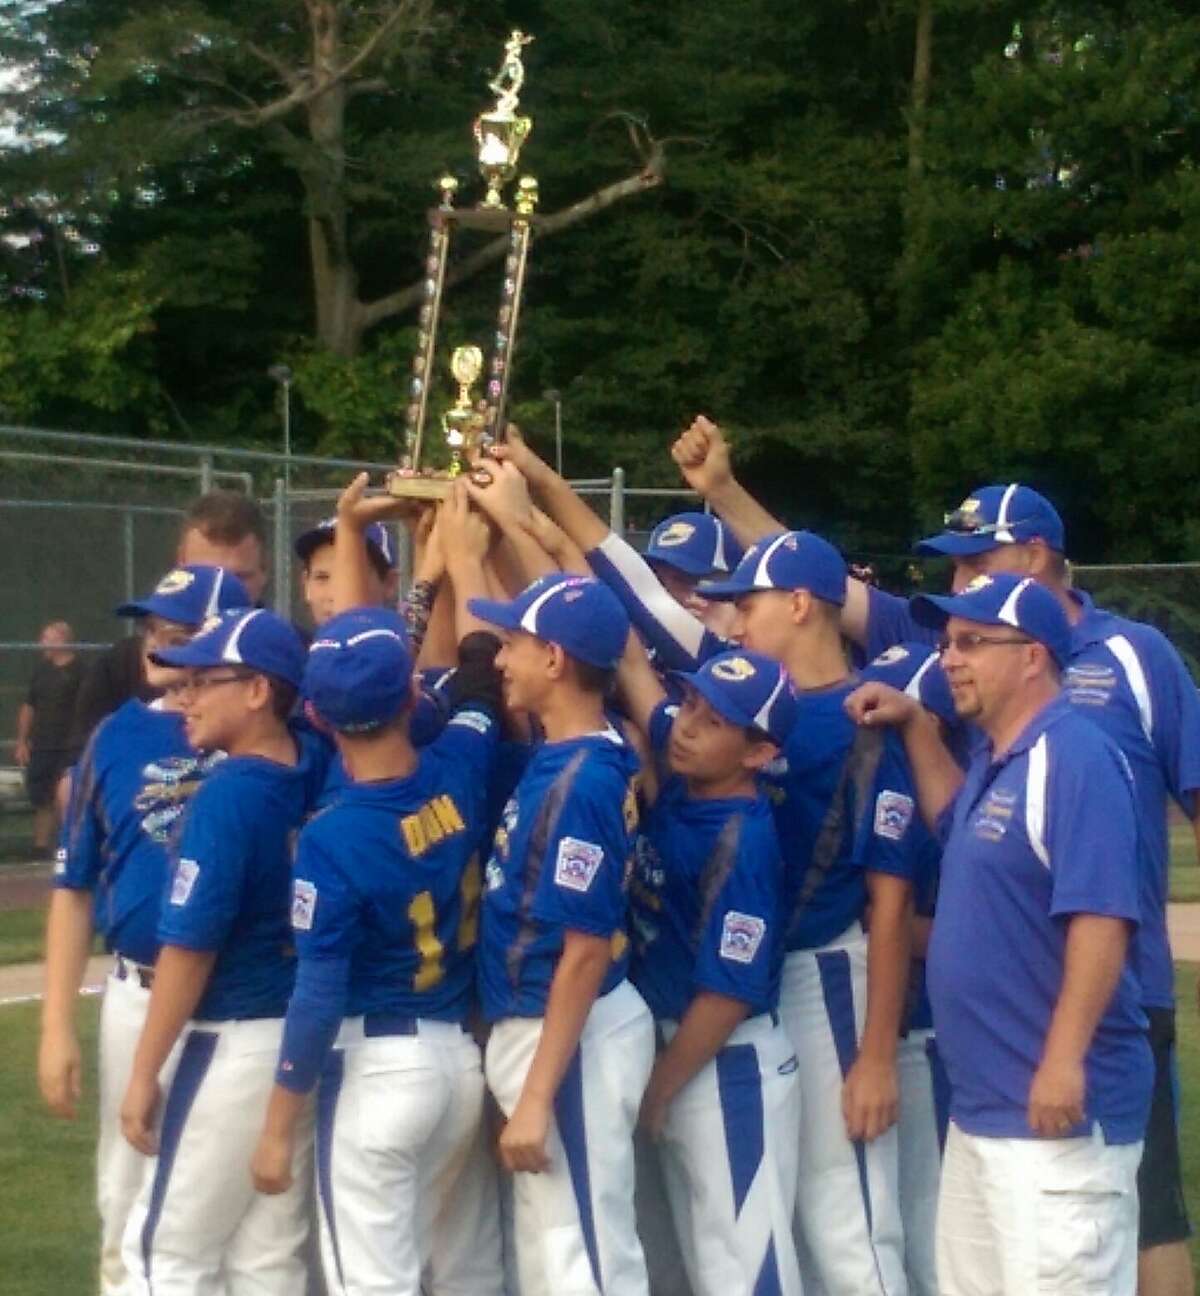 Seymour celebrates its fourth straight District title after its victory over Beacon Falls.